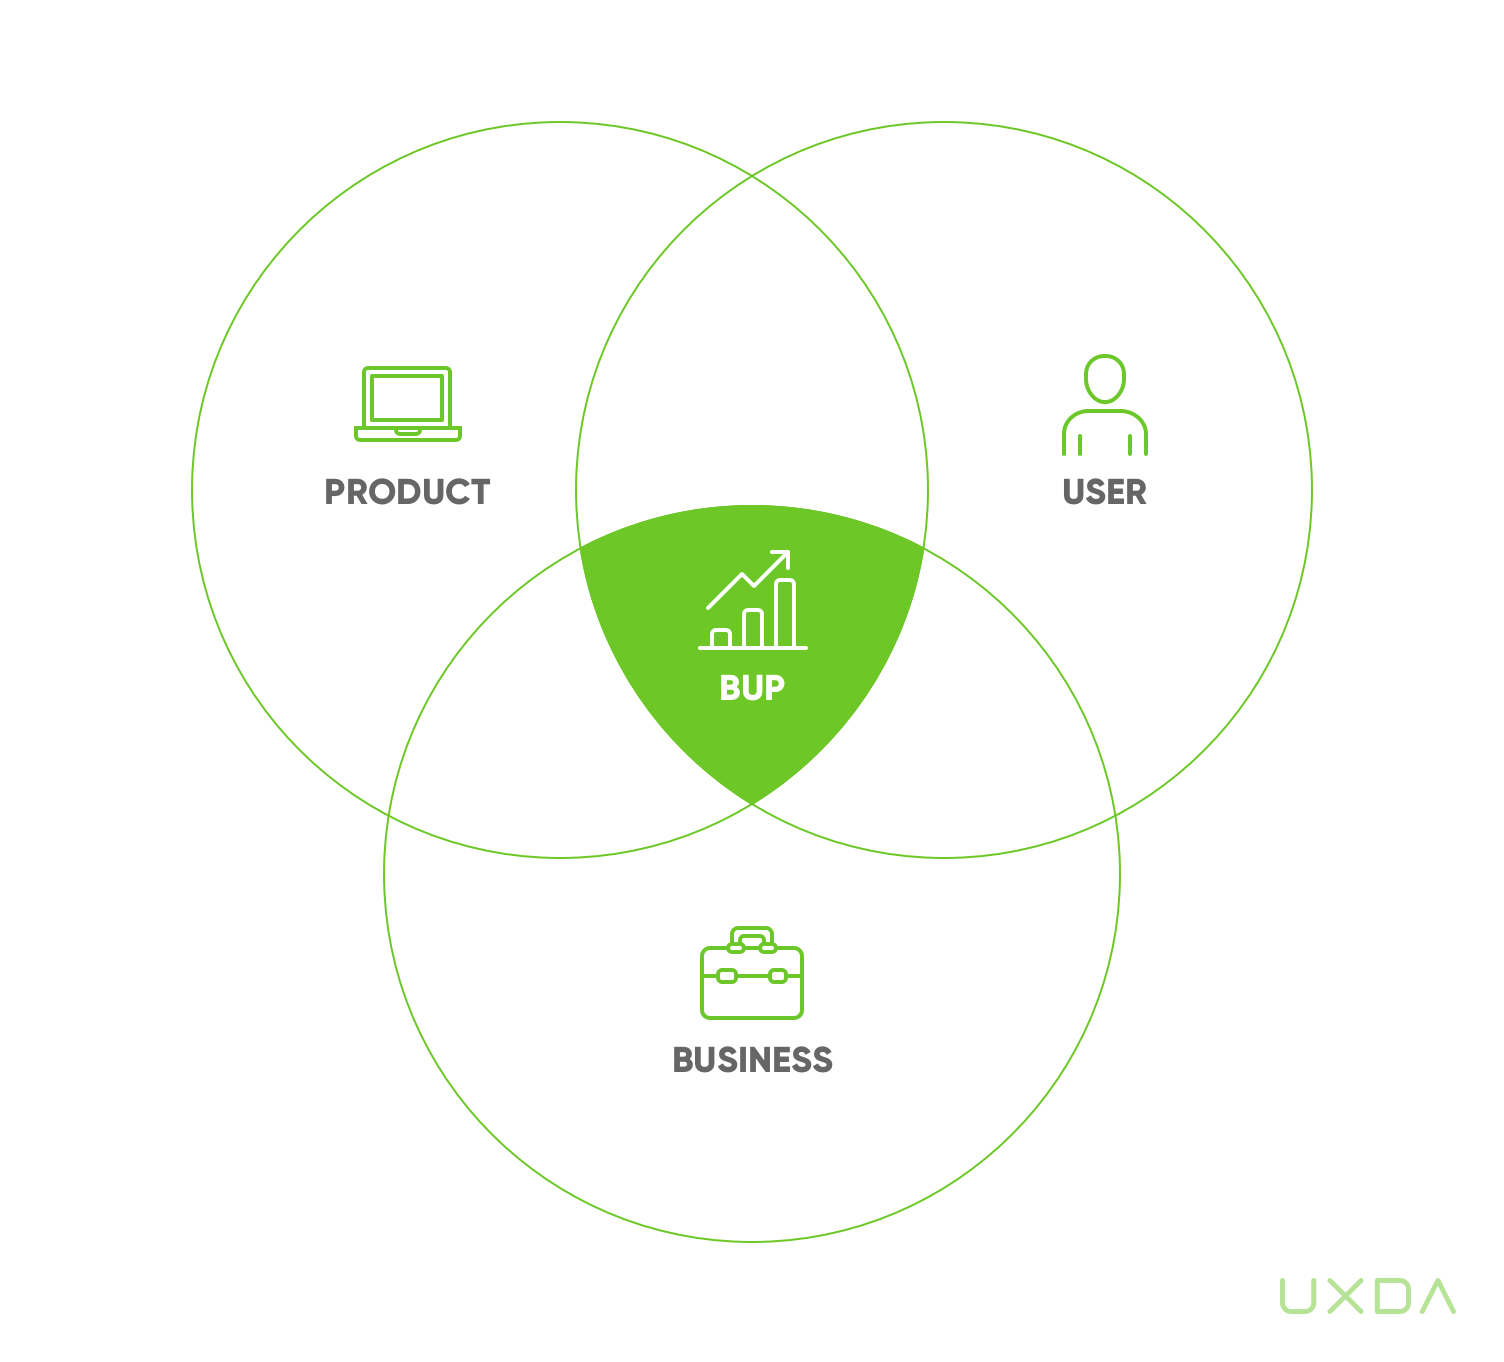 How to Improve Your Banking Customer Experience - UXDA's BUP Frame